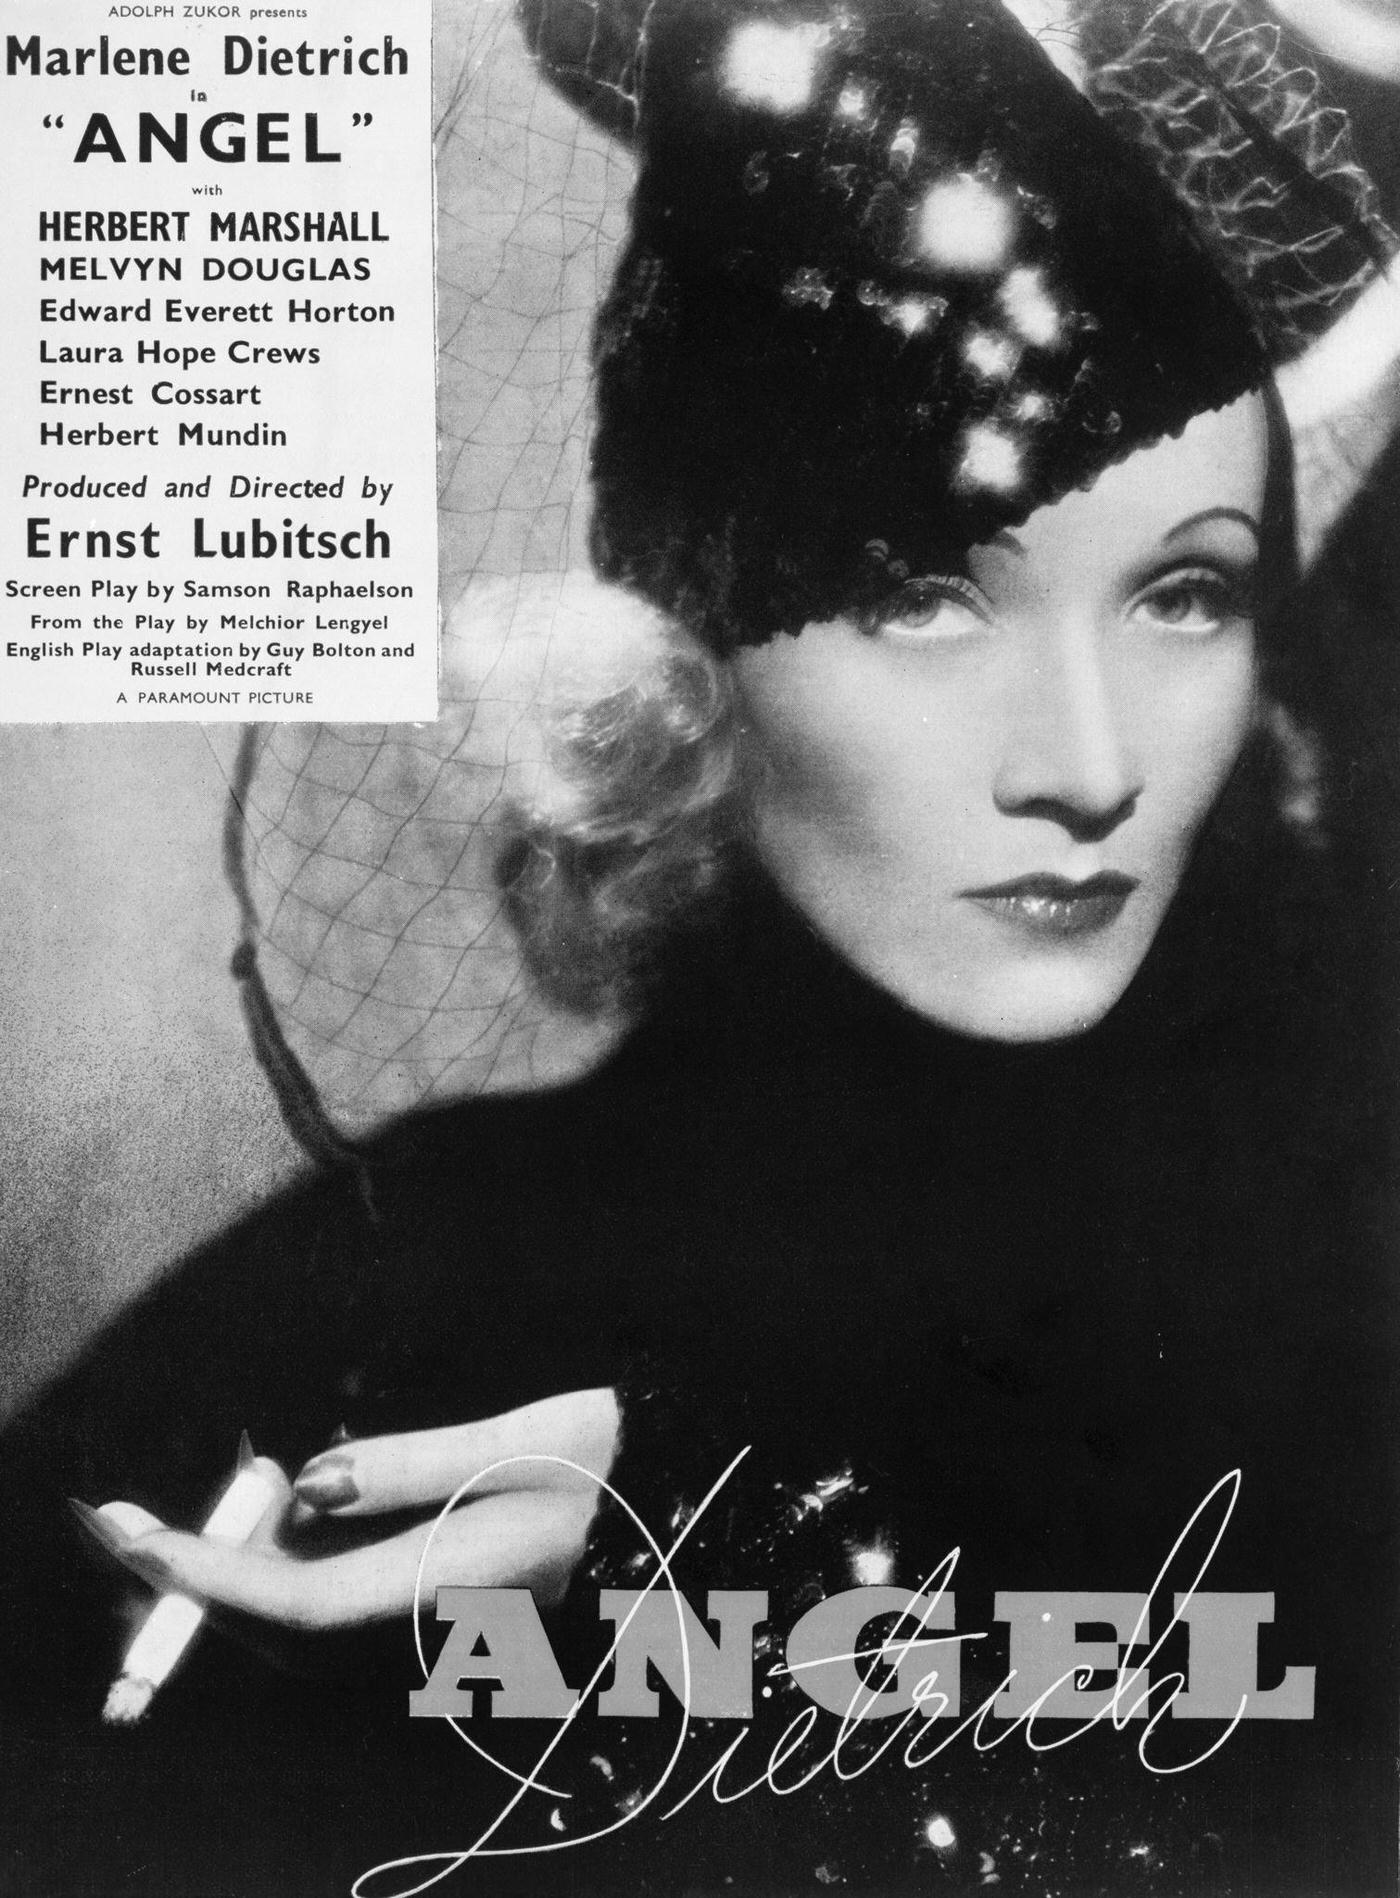 Marlene Dietrich poses in an advertisement for the romantic drama 'Angel' in 1937.